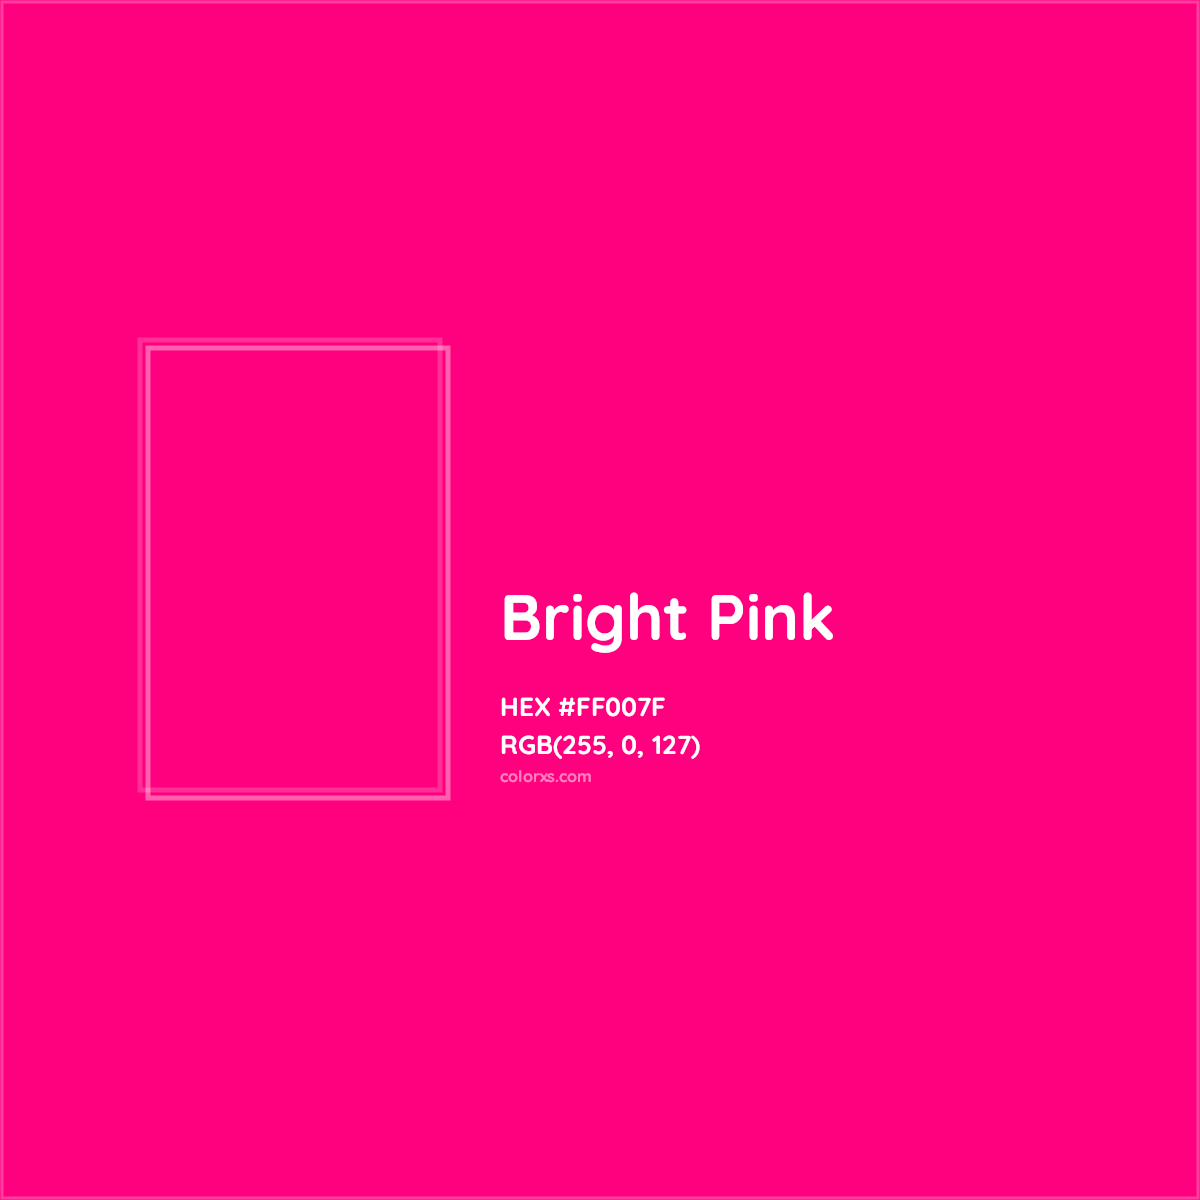 Bright Pink: Best Practices, Color Codes & More!